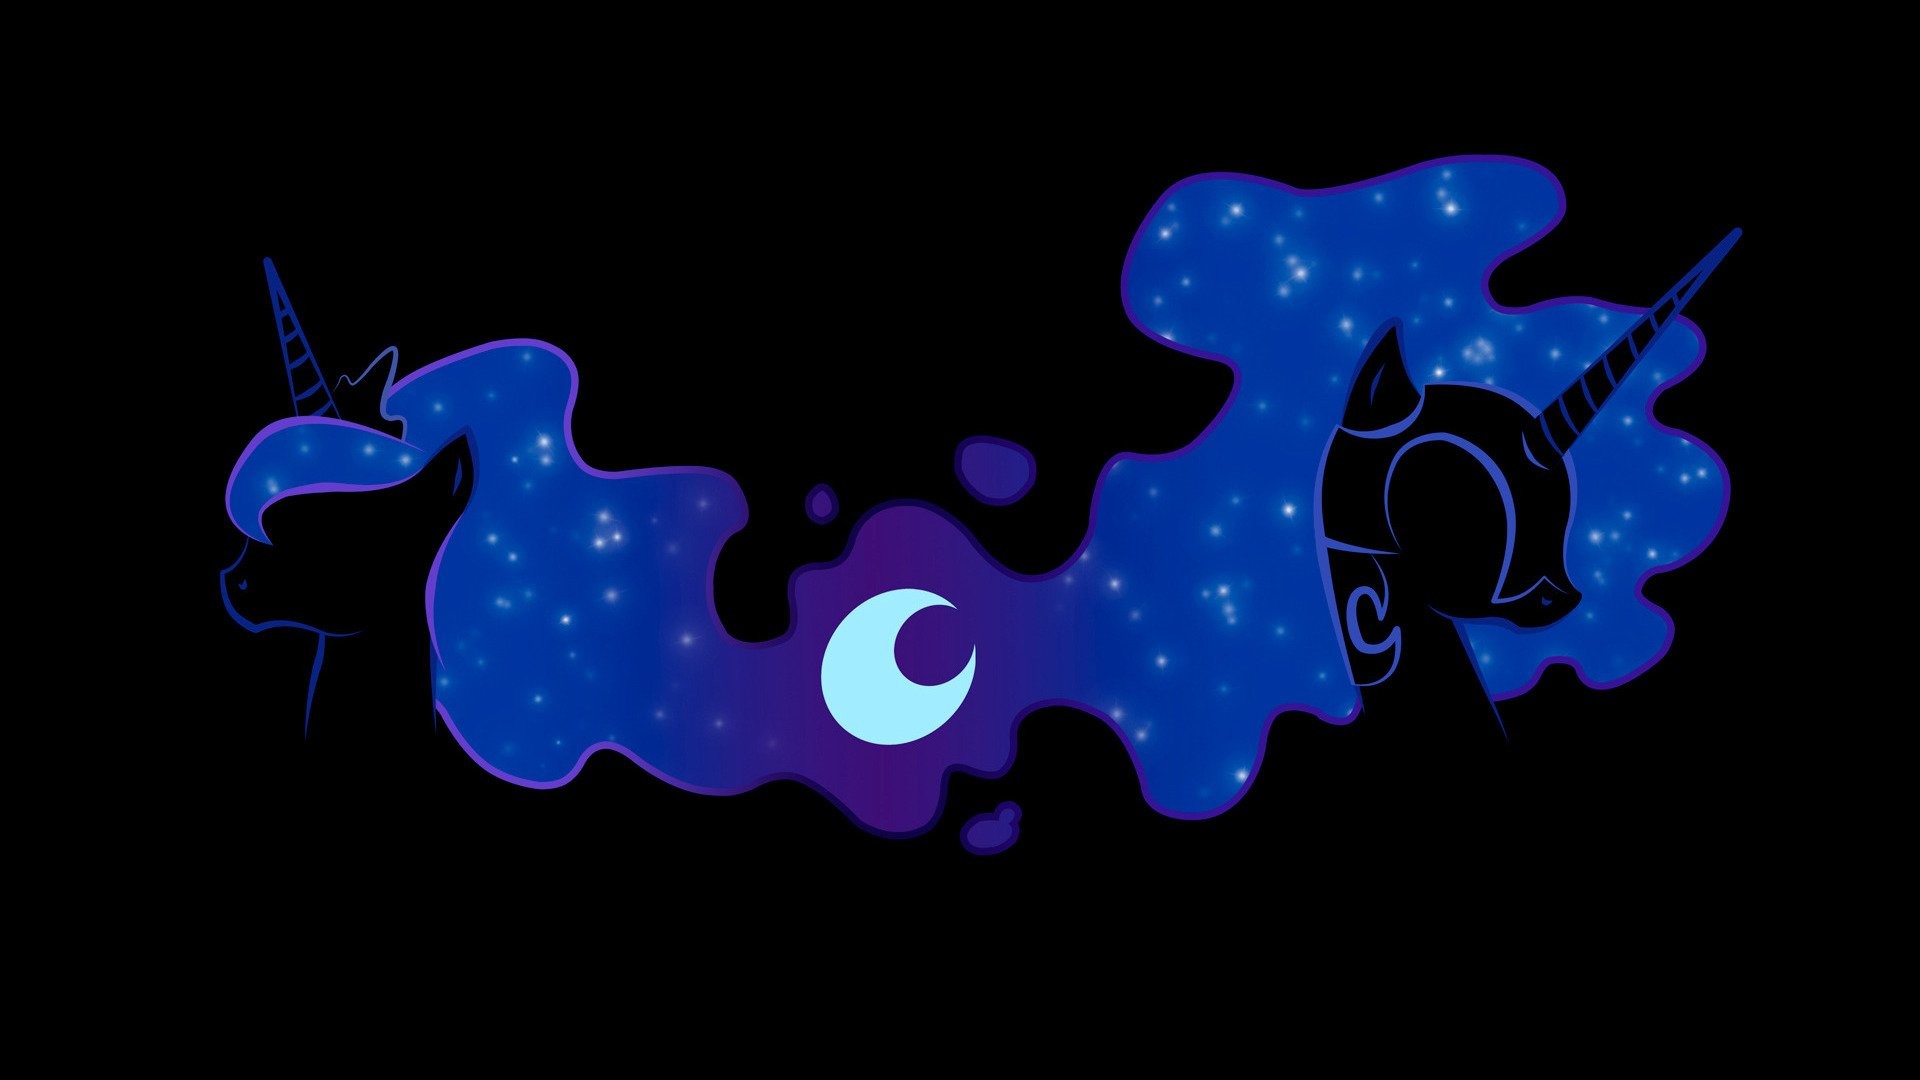 1920x1080 My Little Pony - L'amicizia Ã¨ magica images nightmare moon and princess  Luna wallpaper HD wallpaper and background photos